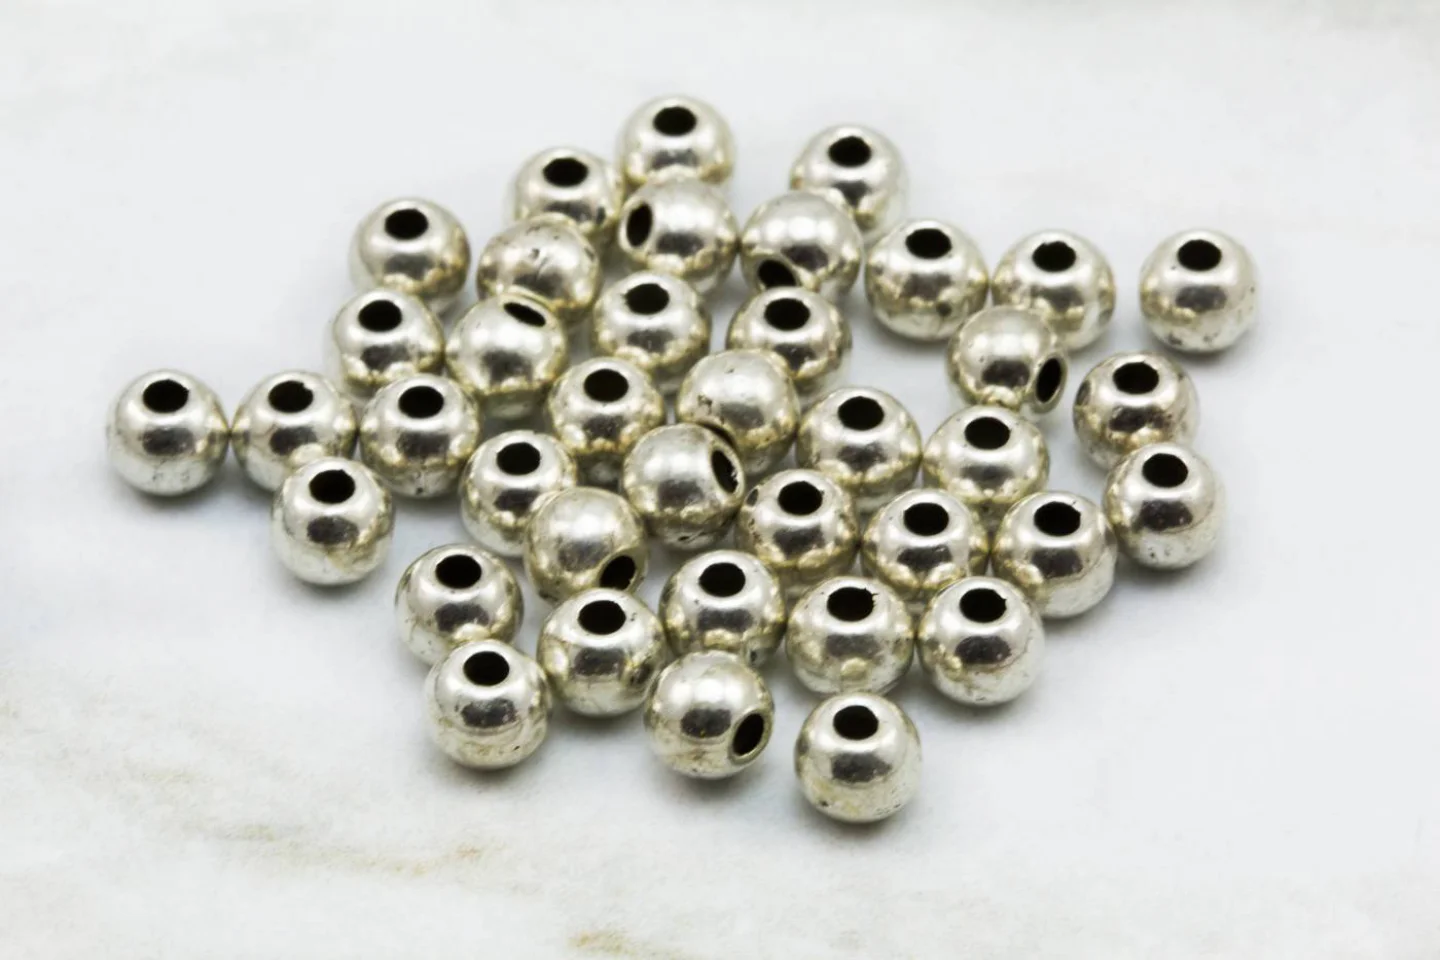 5mm-metal-ball-spacer-bead-charm-finding.